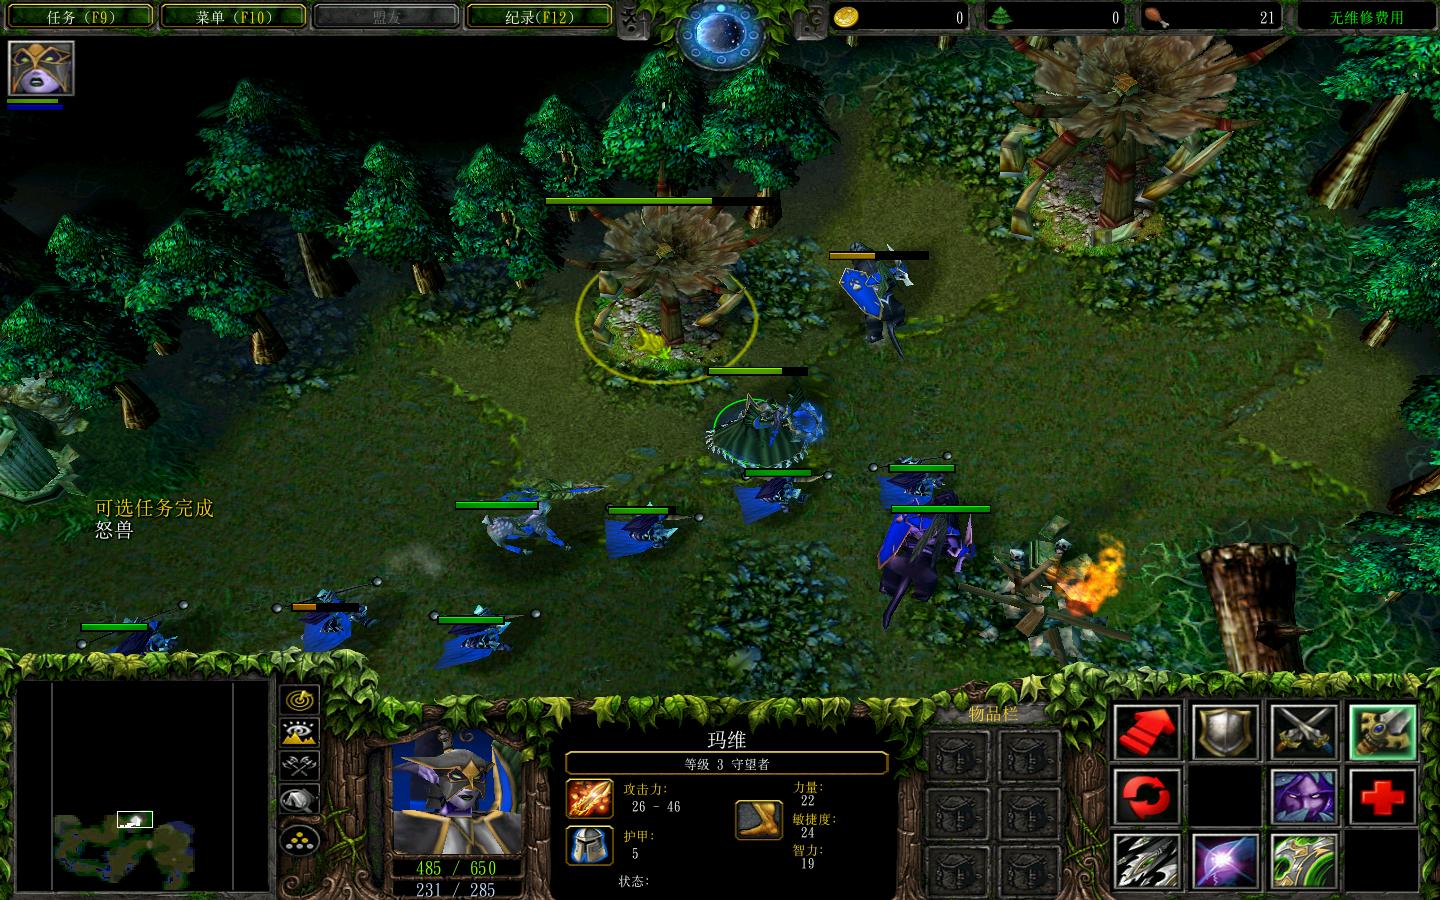 ħ3Warcraft III The Frozen Thronev1.20-κ3C v3.35.56